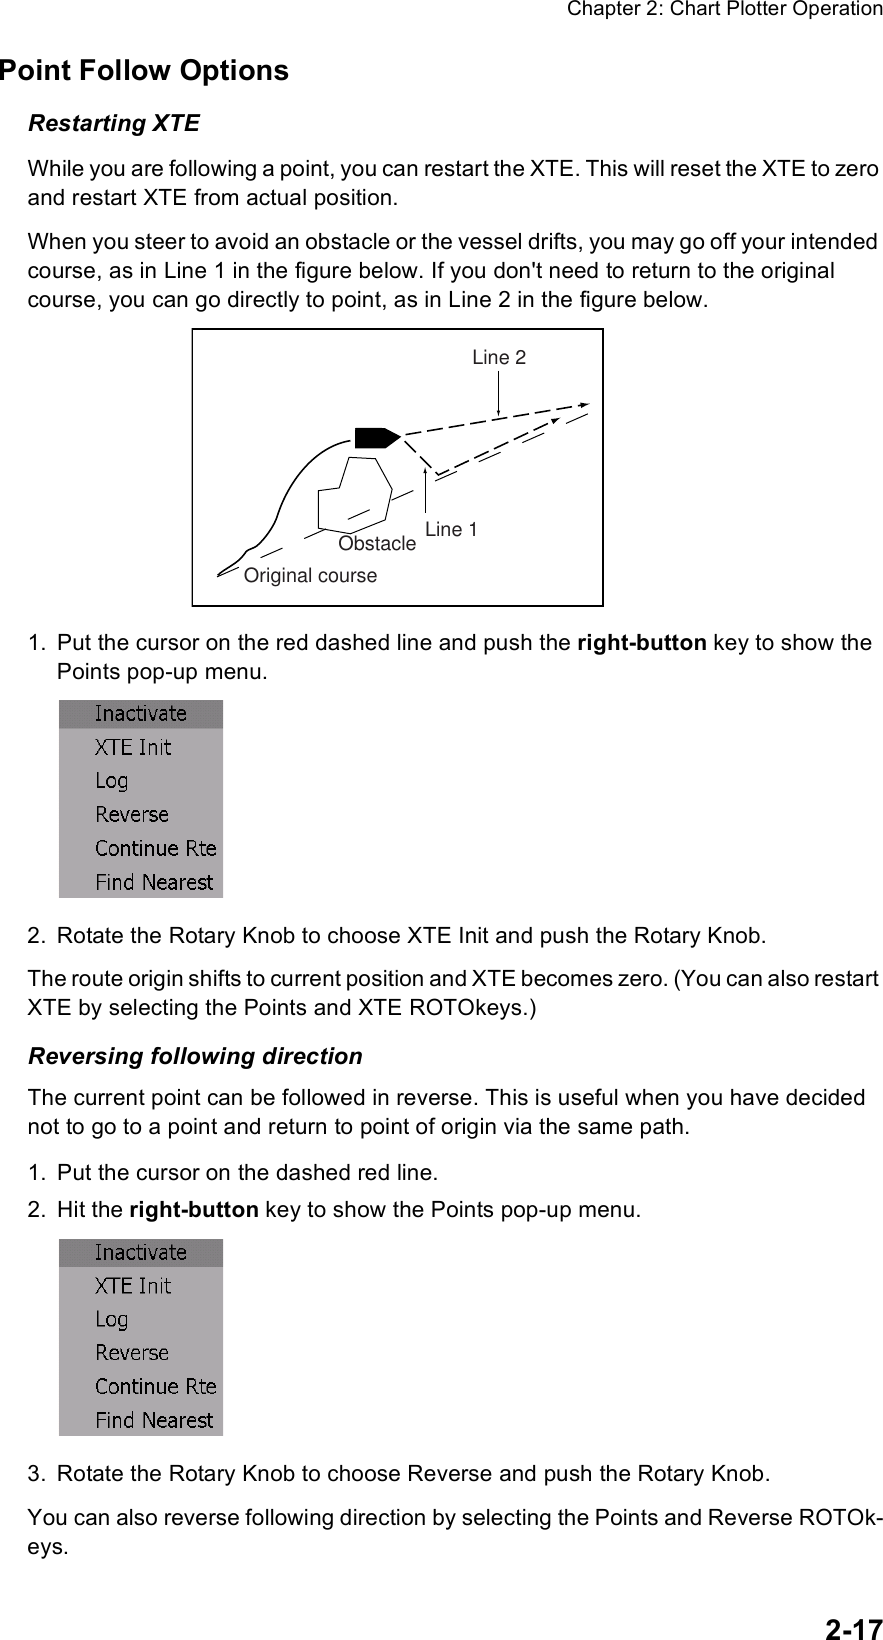 Chapter 2: Chart Plotter Operation2-17Point Follow OptionsRestarting XTEWhile you are following a point, you can restart the XTE. This will reset the XTE to zero and restart XTE from actual position.When you steer to avoid an obstacle or the vessel drifts, you may go off your intended course, as in Line 1 in the figure below. If you don&apos;t need to return to the original course, you can go directly to point, as in Line 2 in the figure below.1. Put the cursor on the red dashed line and push the right-button key to show the Points pop-up menu.2. Rotate the Rotary Knob to choose XTE Init and push the Rotary Knob.The route origin shifts to current position and XTE becomes zero. (You can also restart XTE by selecting the Points and XTE ROTOkeys.)Reversing following directionThe current point can be followed in reverse. This is useful when you have decided not to go to a point and return to point of origin via the same path.1. Put the cursor on the dashed red line.2. Hit the right-button key to show the Points pop-up menu.3. Rotate the Rotary Knob to choose Reverse and push the Rotary Knob.You can also reverse following direction by selecting the Points and Reverse ROTOk-eys.Original courseObstacle Line 1Line 2